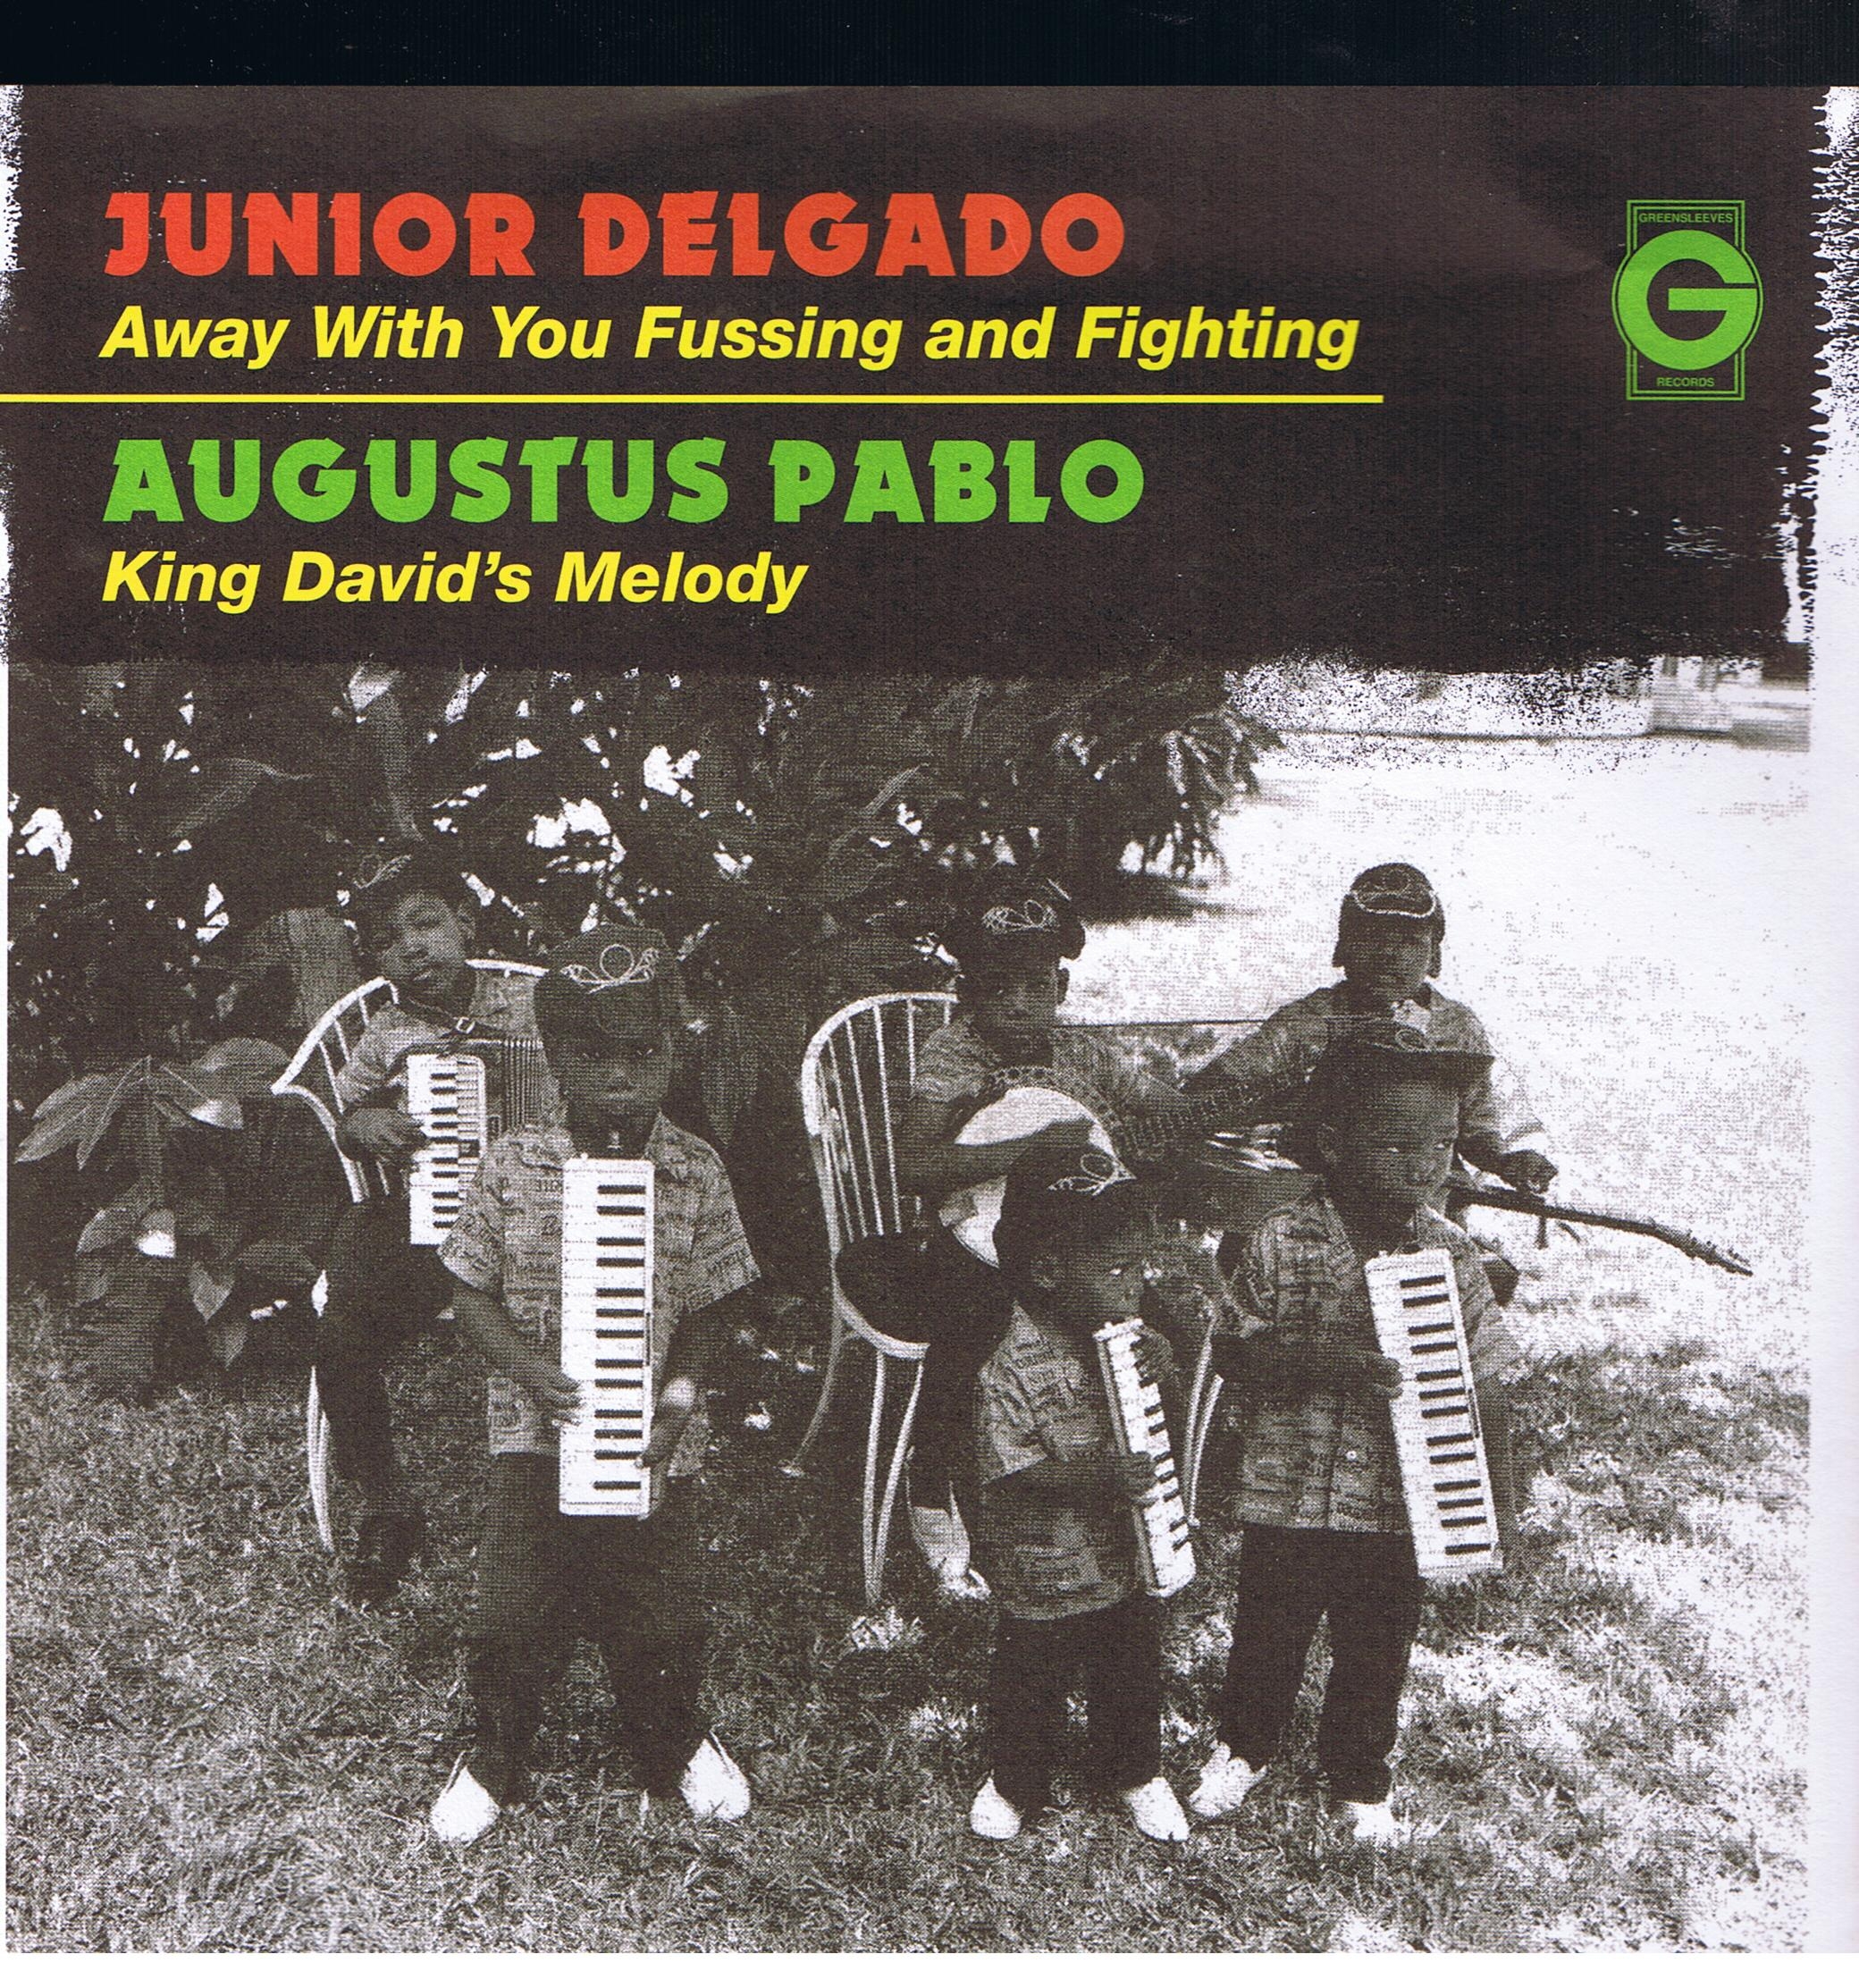 Junior Delgado - Away With Your Fussing And Fighting / Augustus Pablo - King David's Melody (7")